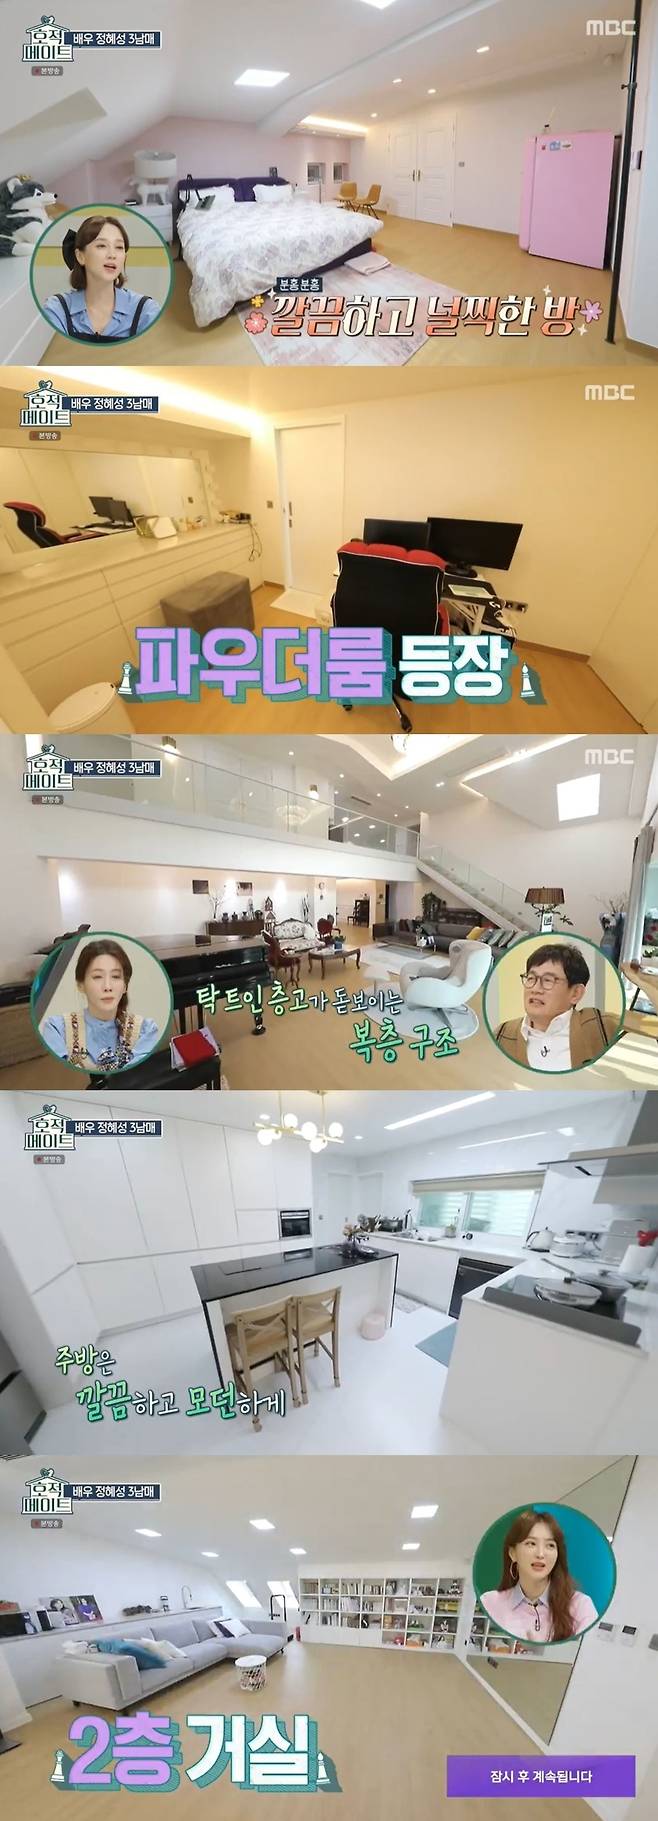 The second floor house where actor Jung Hye-sung and three siblings live was released.Actor Jung Hye Sung appeared in MBC Family register mate episode 8 broadcast on March 8th.The comet first appeared in a wet sauna, and the comet said, I liked the sauna so much that I installed it in my bathroom.The comet, which opened the morning to the sauna, moved to the room, where the room interiors, with pink and purple points all over the place, were impressed.The comet then called Sister at home, a three-year age difference from the comet and a 15-year-old from About Her Brother.The pair called up their youngest to celebrate their youngest high school graduate, who told About Her Brother on the phone to come upstairs.Then his brother seemed familiar and said, What are you going to do?The reason they talked on the phone while in the same house was because of the large house: the About Her Brother room on the first floor, the comets room on the second floor.The large living room was filled with the admiration of the cast, from the grand piano to the antique furniture, with the open floors to the second floor, and the large chandelier and the glass veranda added to the glamour.In addition, a lot of admiration was poured into the dining room, kitchen, and other space and colorful interiors. Kim Jun-ho was surprised that Interiors are entertaining hotel class.The second floor of the stairs is the living room on the second floor. The comet said, I have not seen Sister for a month.Lee Kyung-gyu said, I will lose my way when I get drunk and go home.